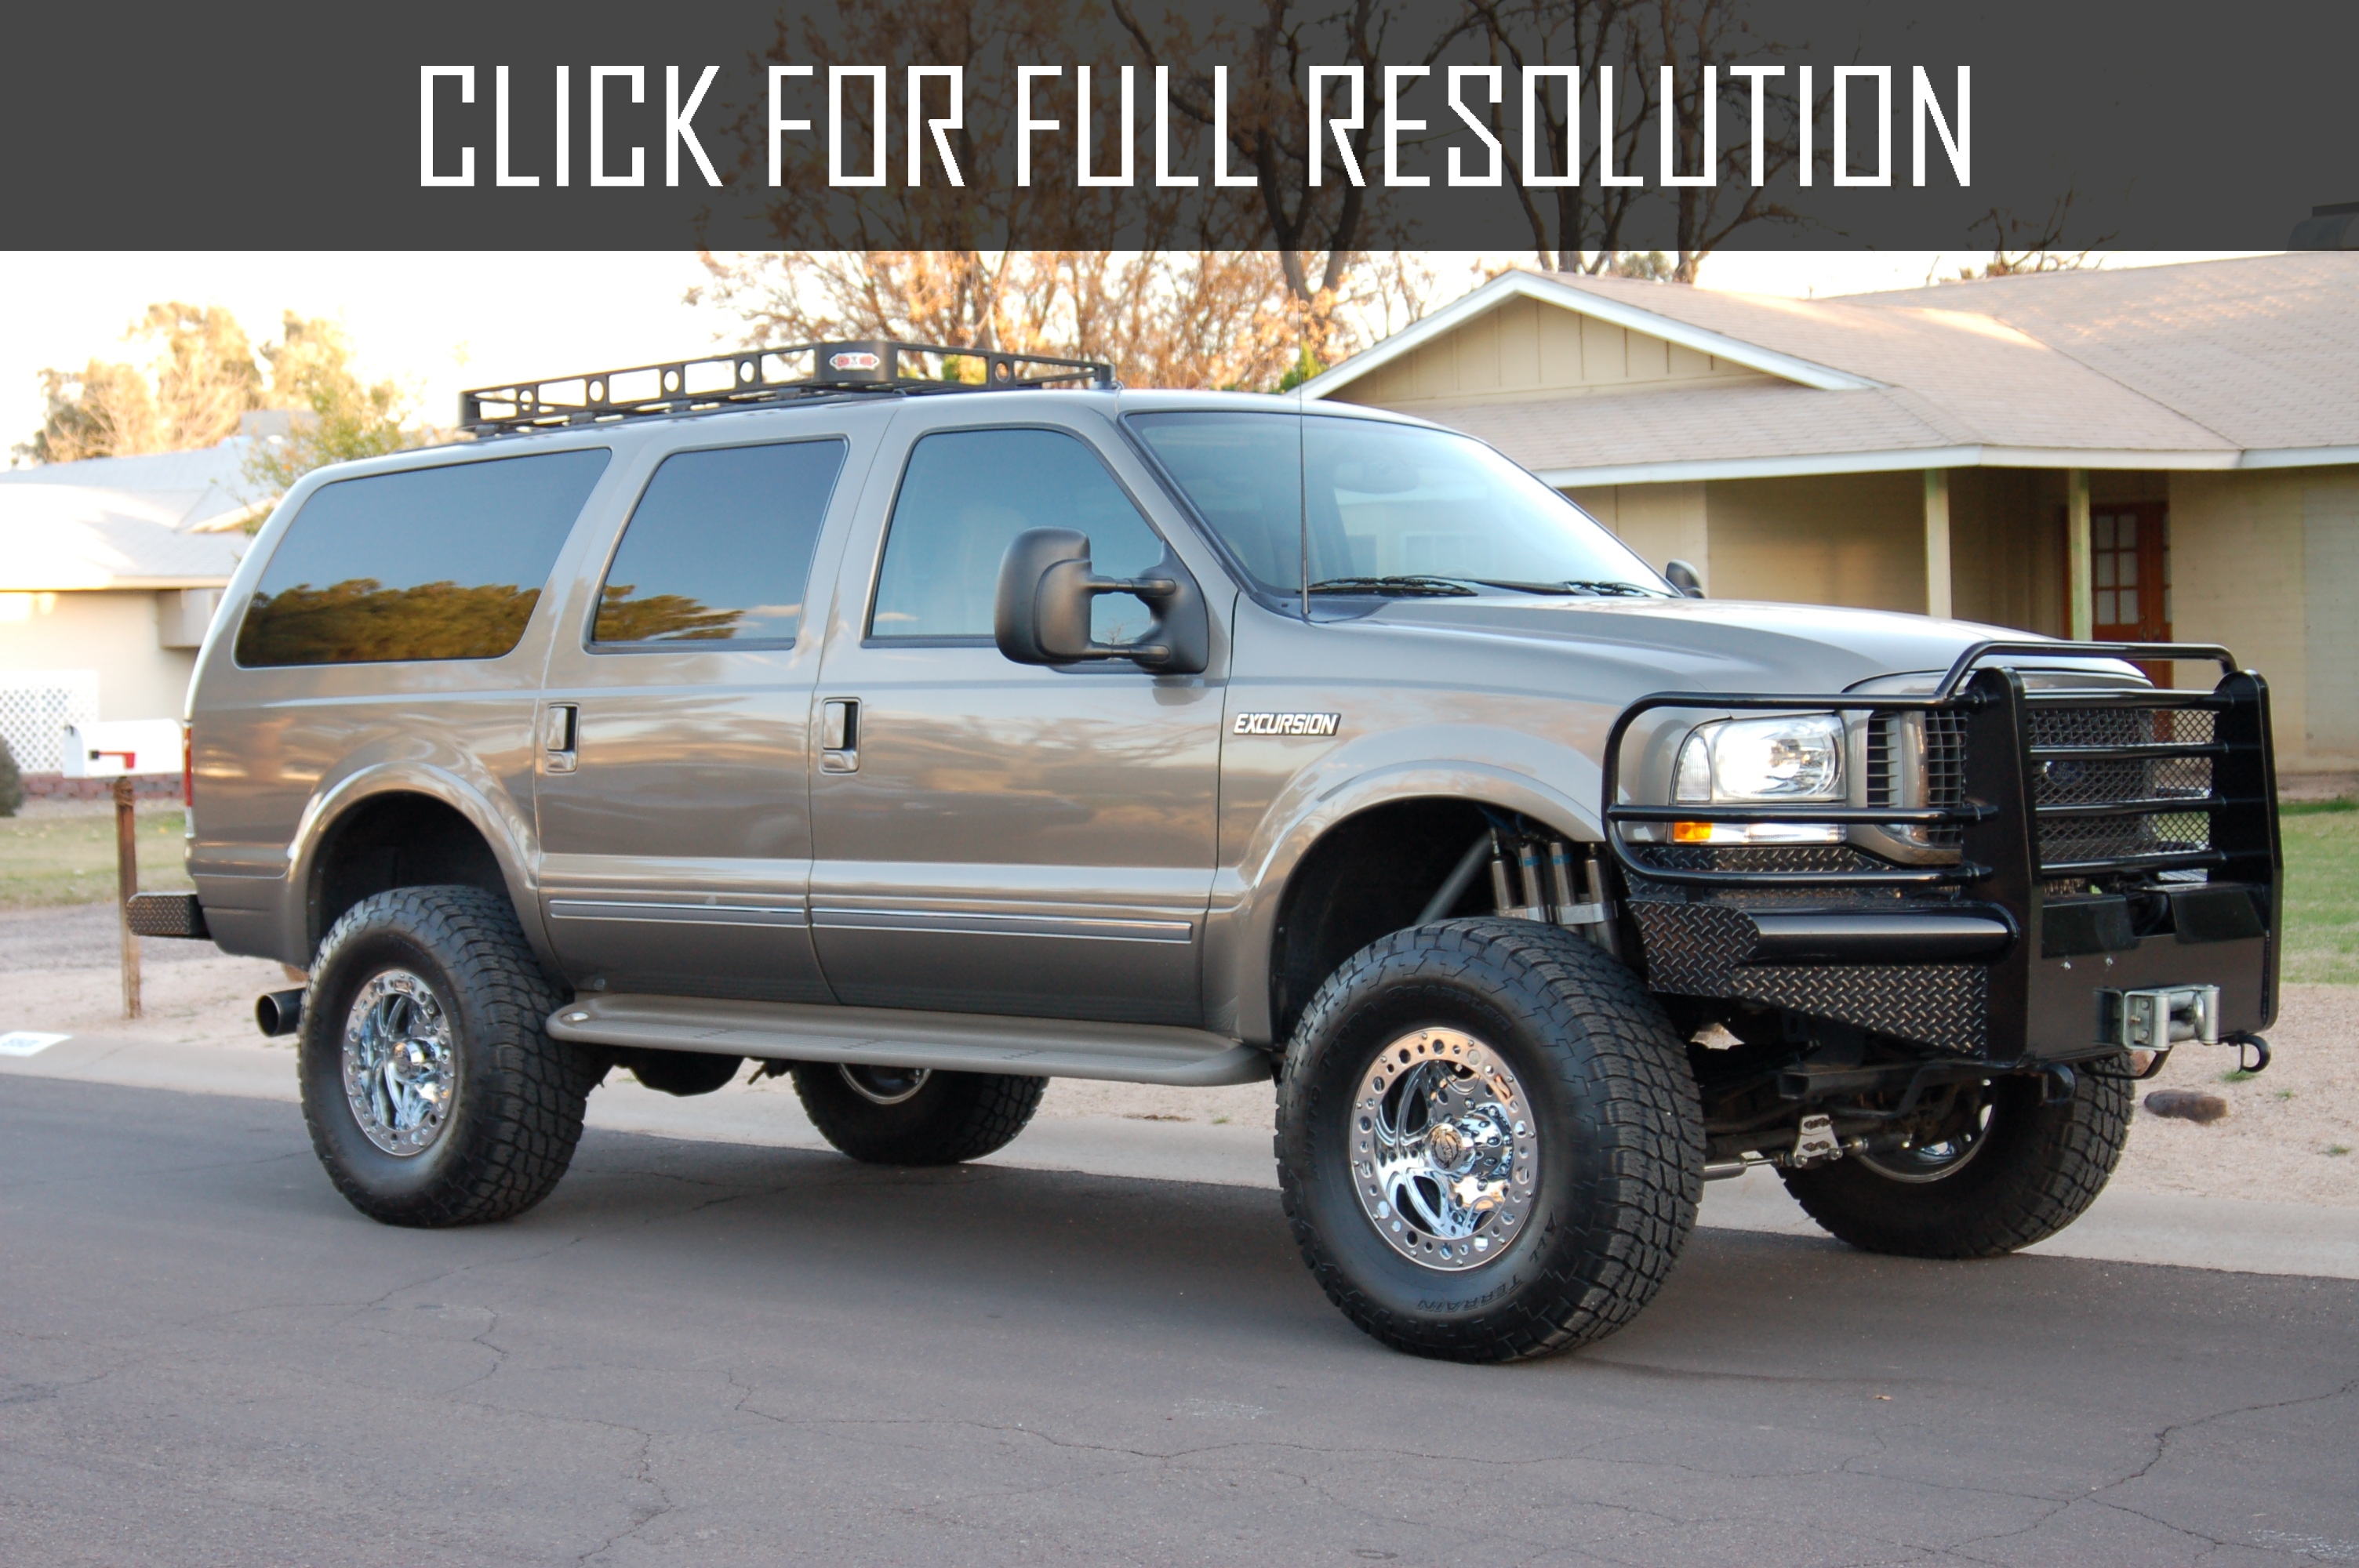 Ford Excursion 4x4